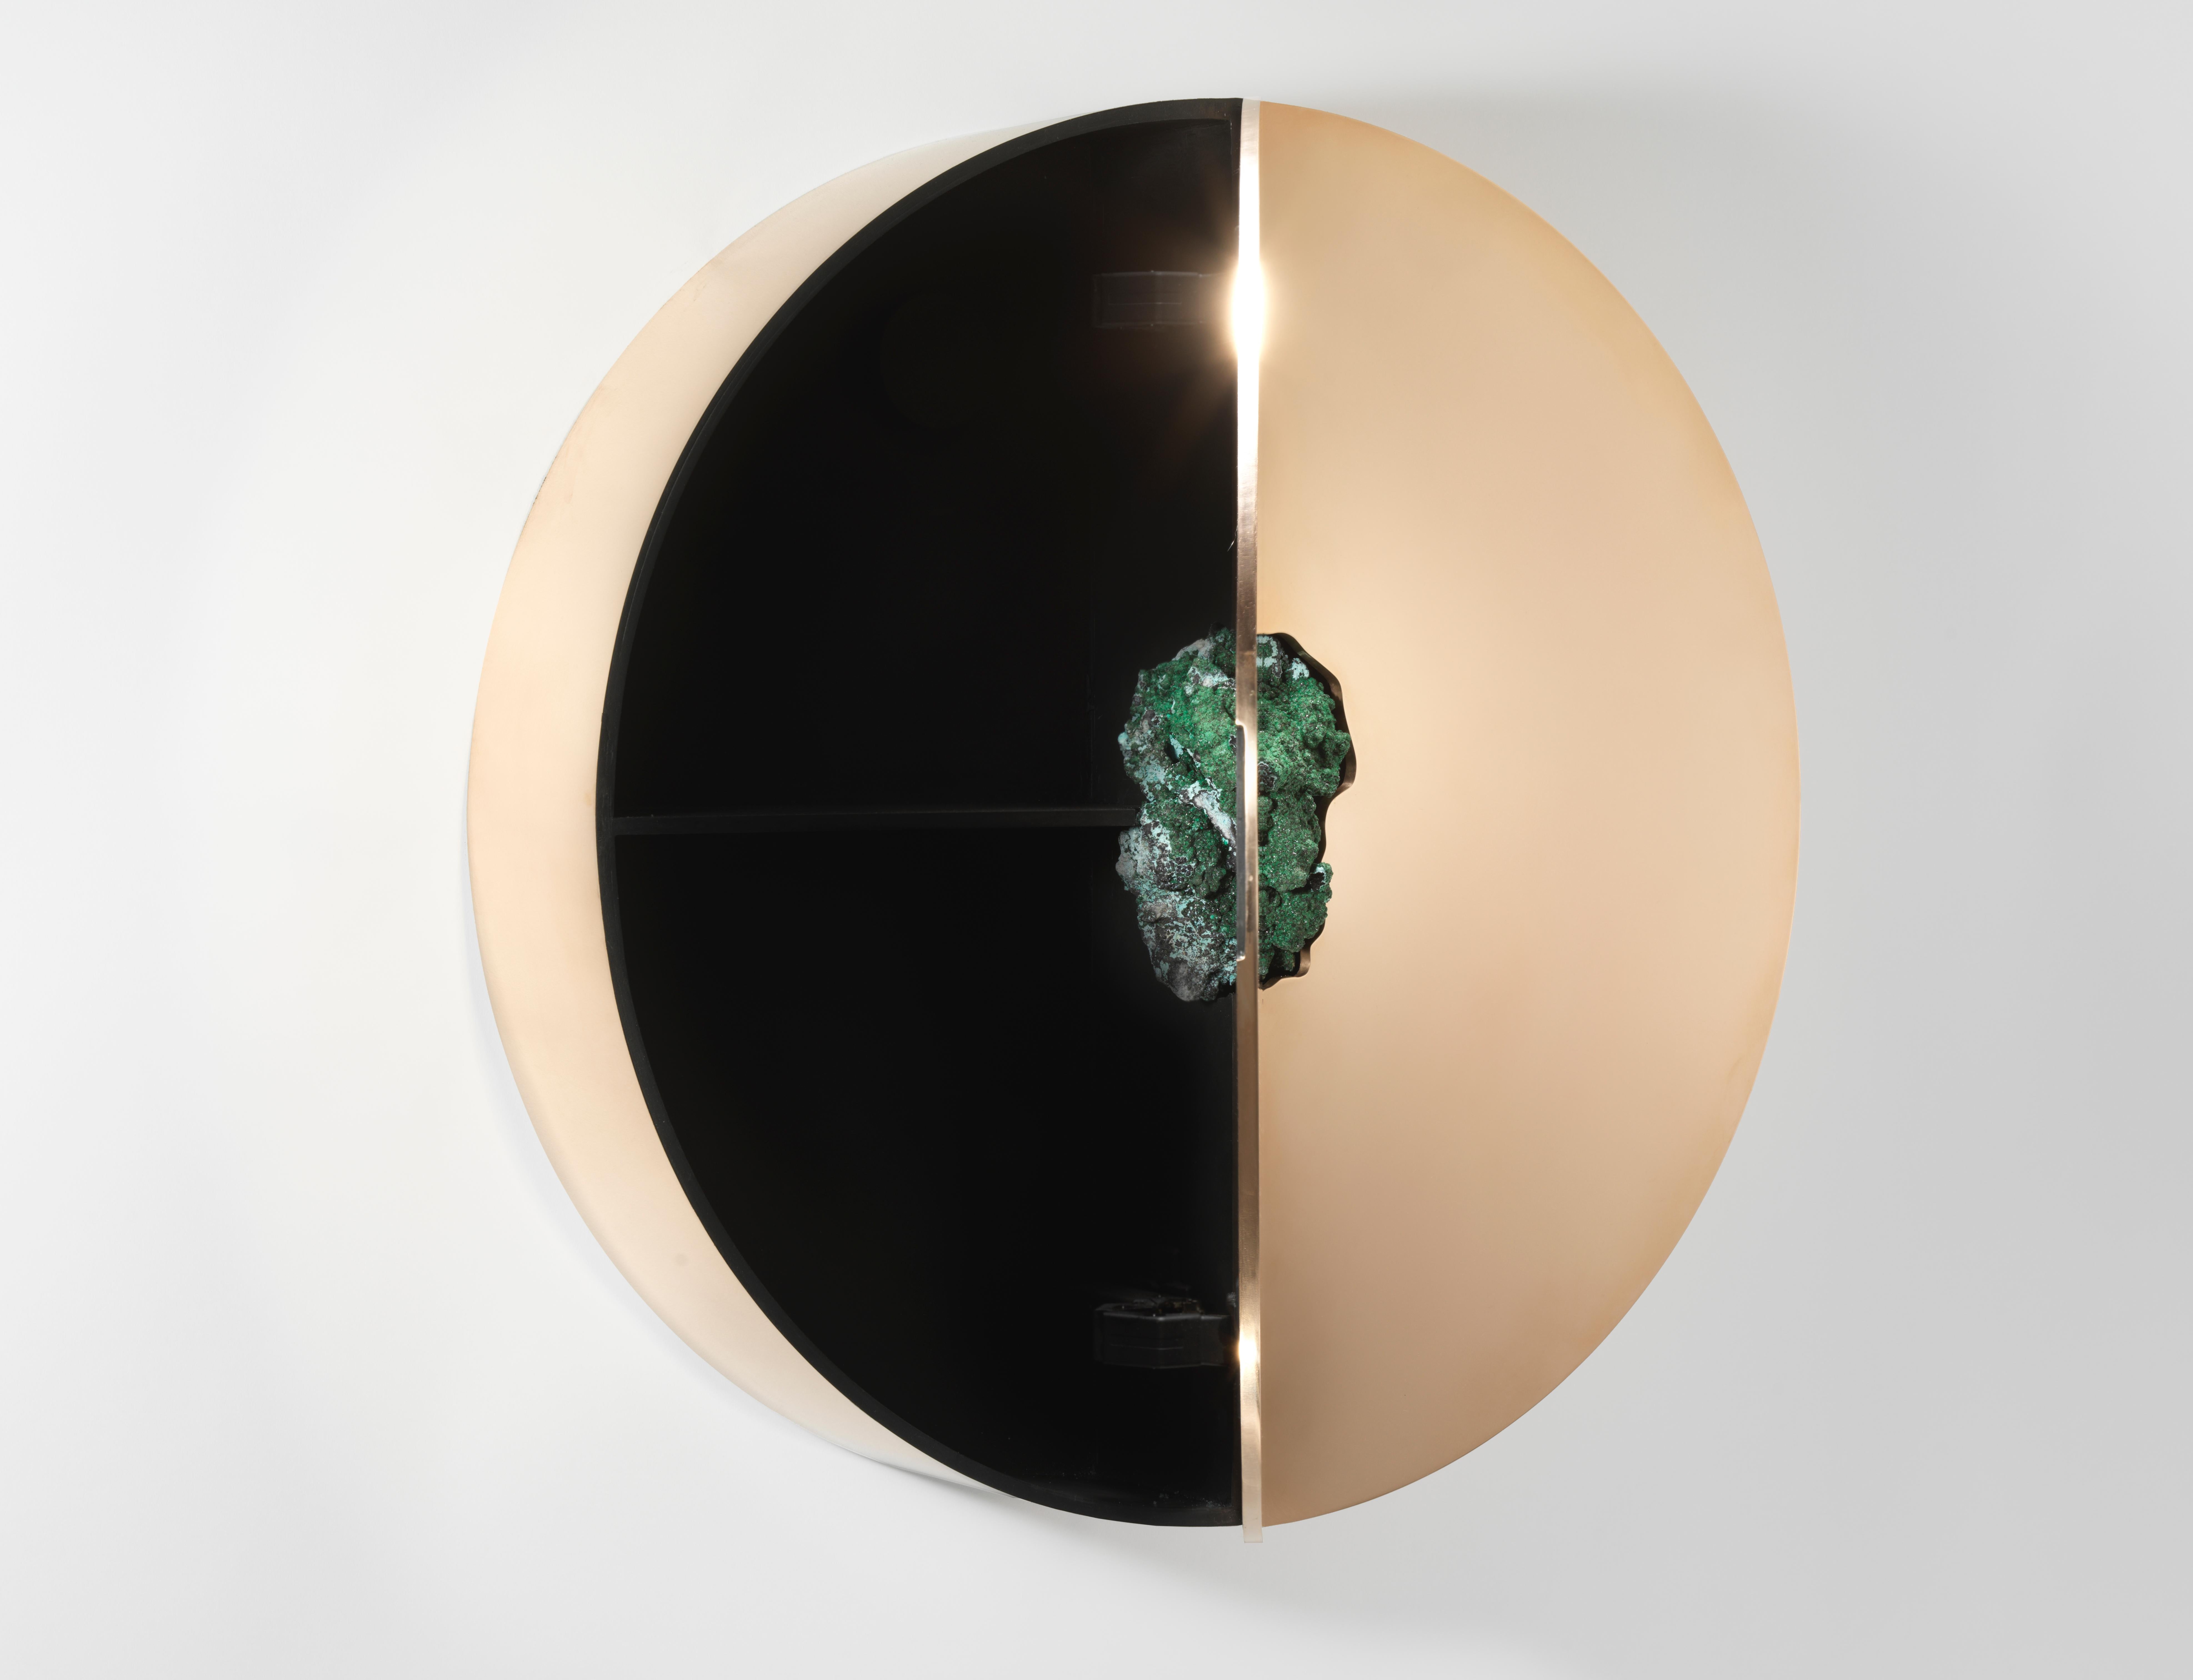 Wall cabinet with Malachite by Pierre De Valck.
Dimensions: W 56 x D 15 x H 56 cm.
Materials: Polished bronze with Malachite.
Weight: 20 kg.
Each piece is unique.

Pierre De Valck (1991) born in Brussels, is a Ghent-based designer with a